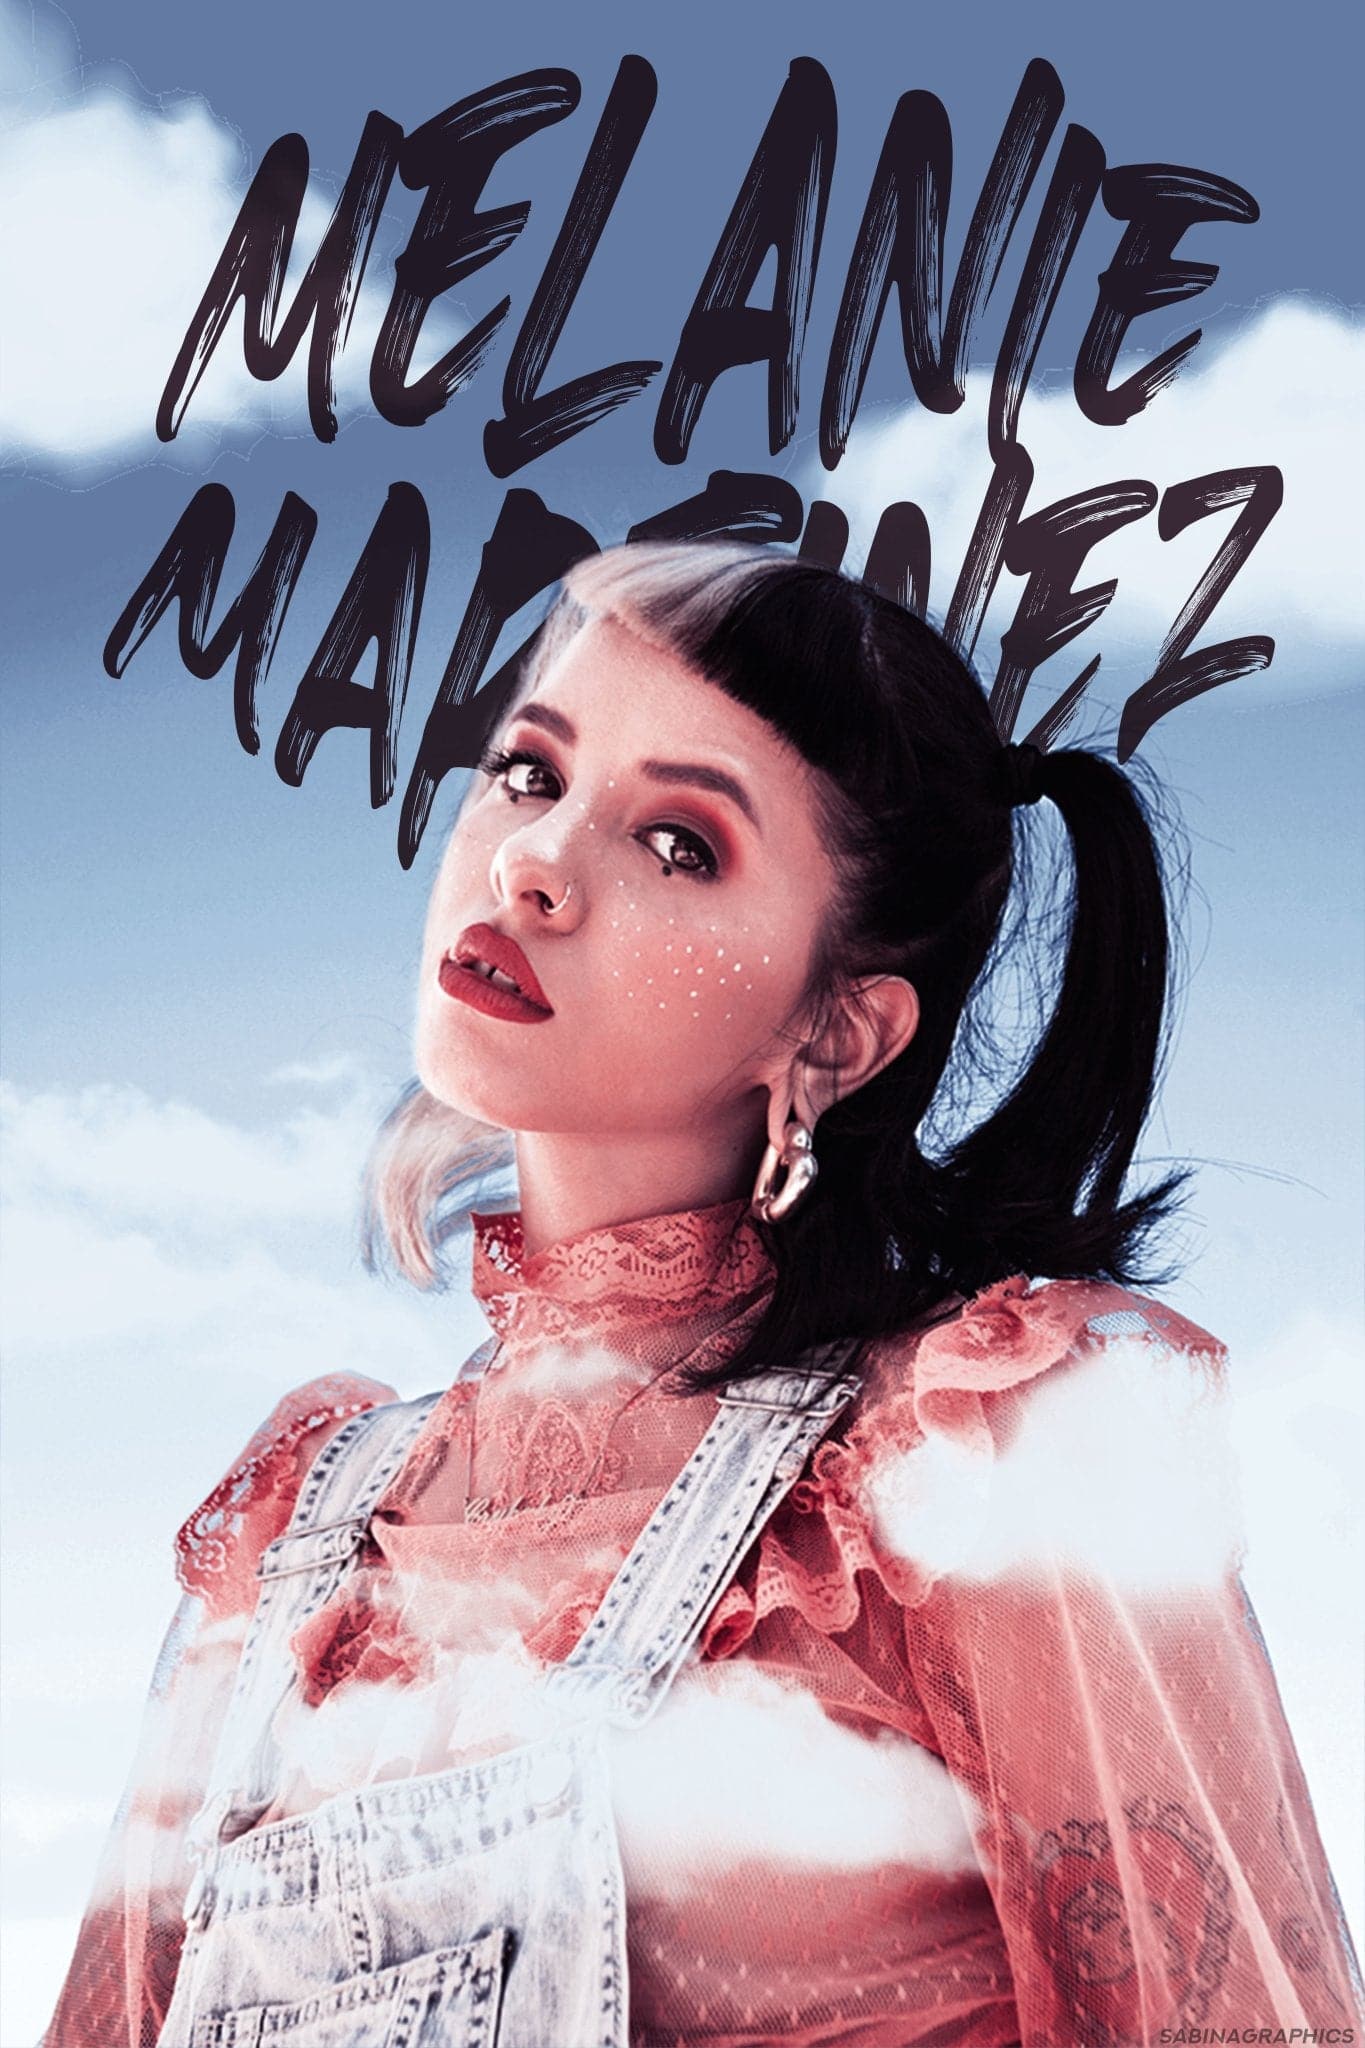 Melanie Martinez ‘Clouds In The Sky’ Poster - Posters Plug